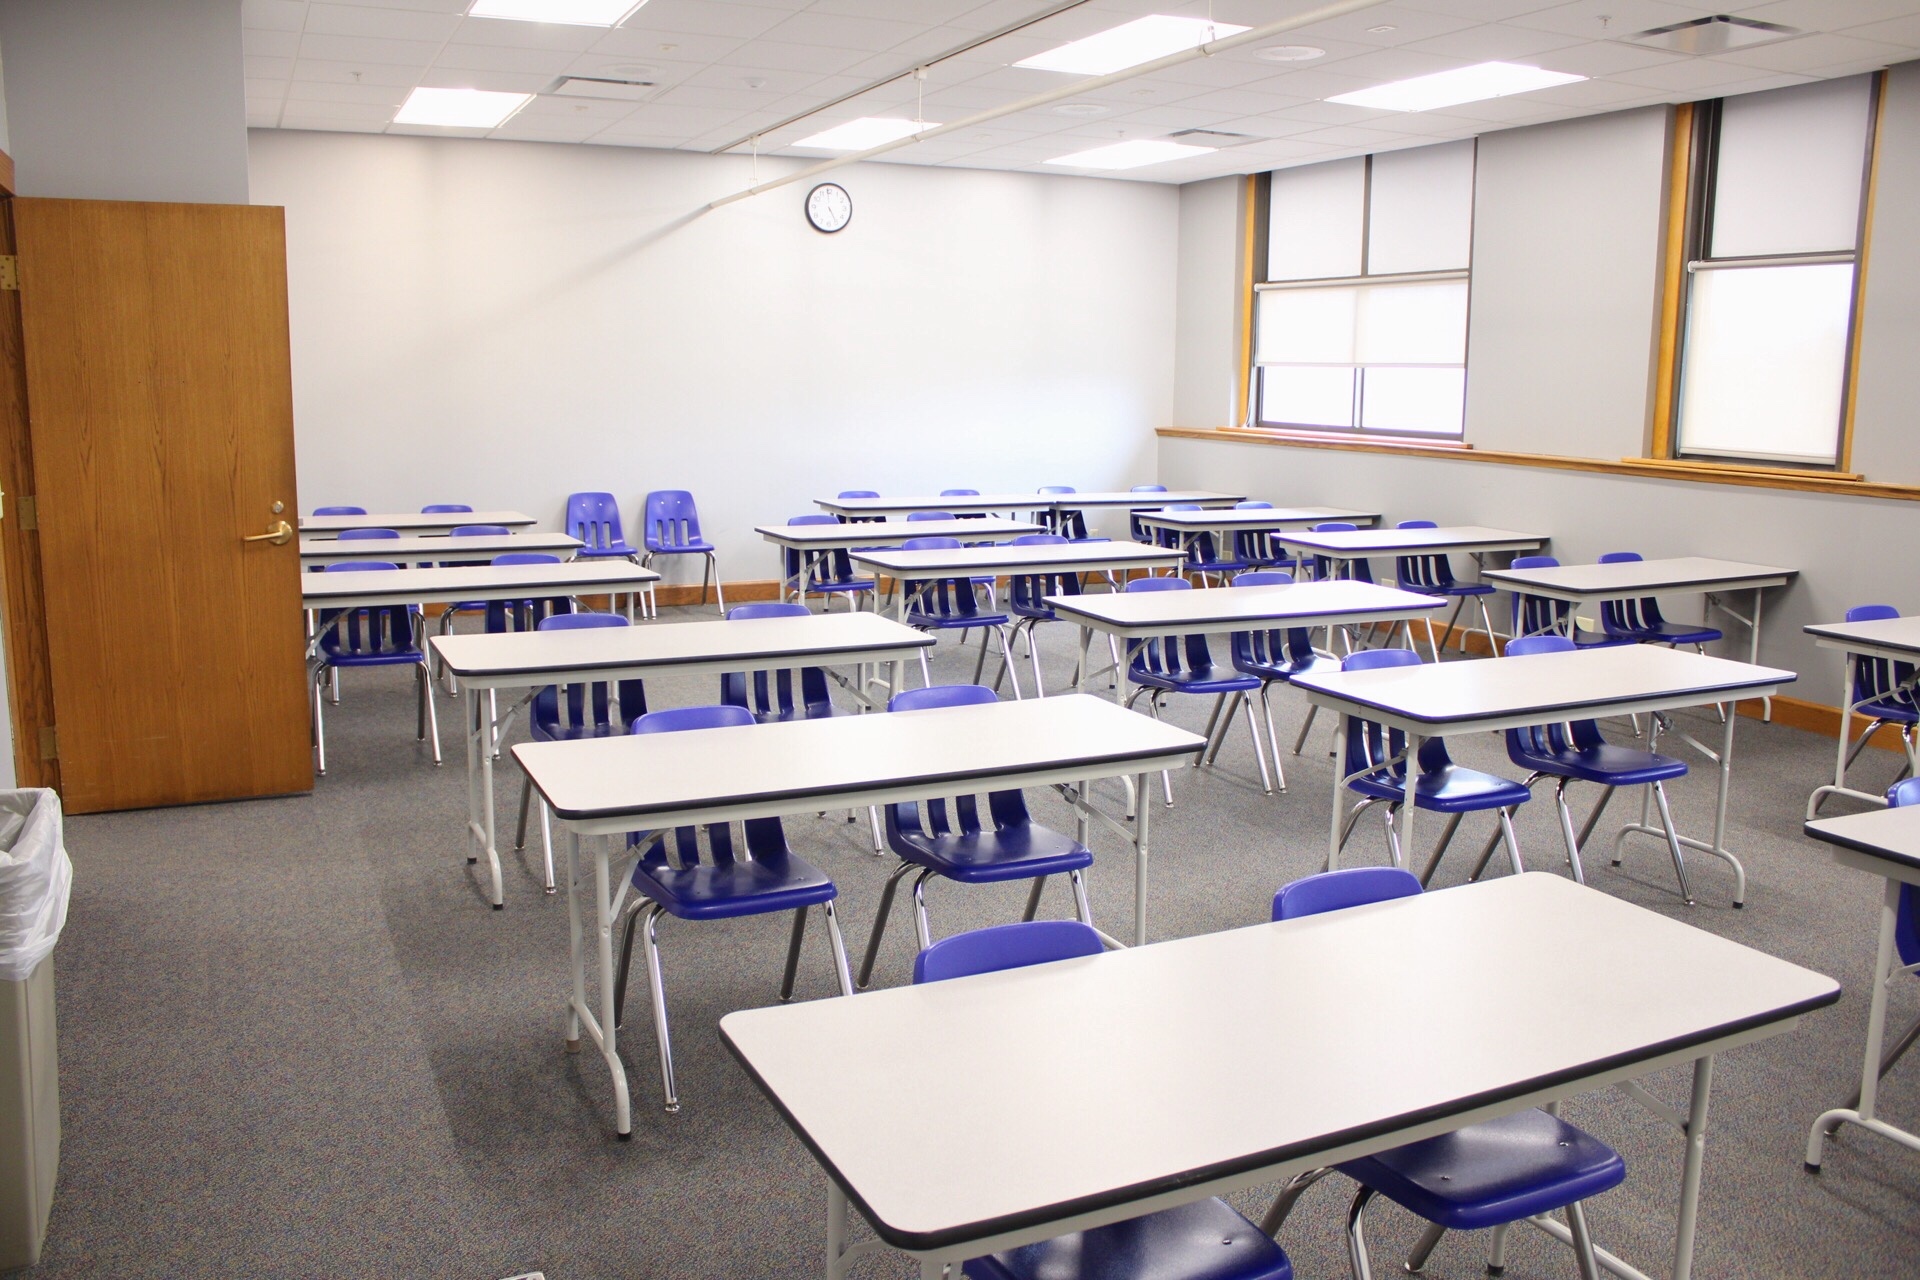 A view of TJ Majors 307 from the front of the class showing tables and chairs.